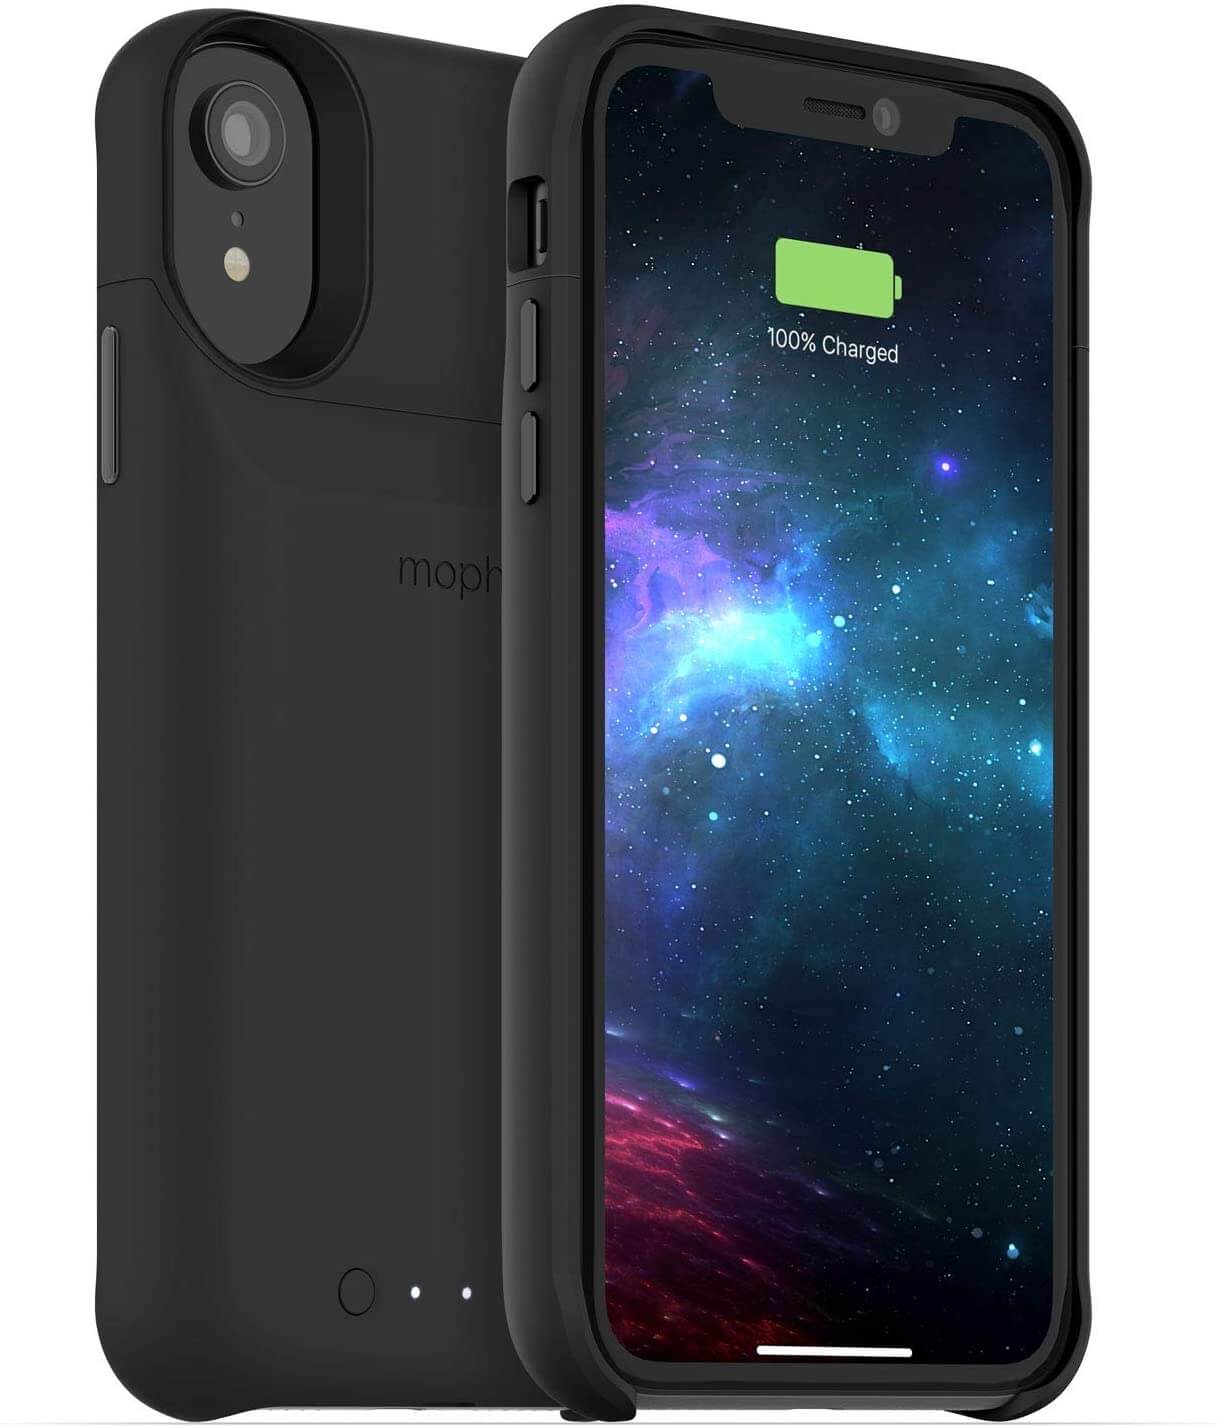 Steve Blum recommends Mophie Juice Pack charging case for iPhone XR